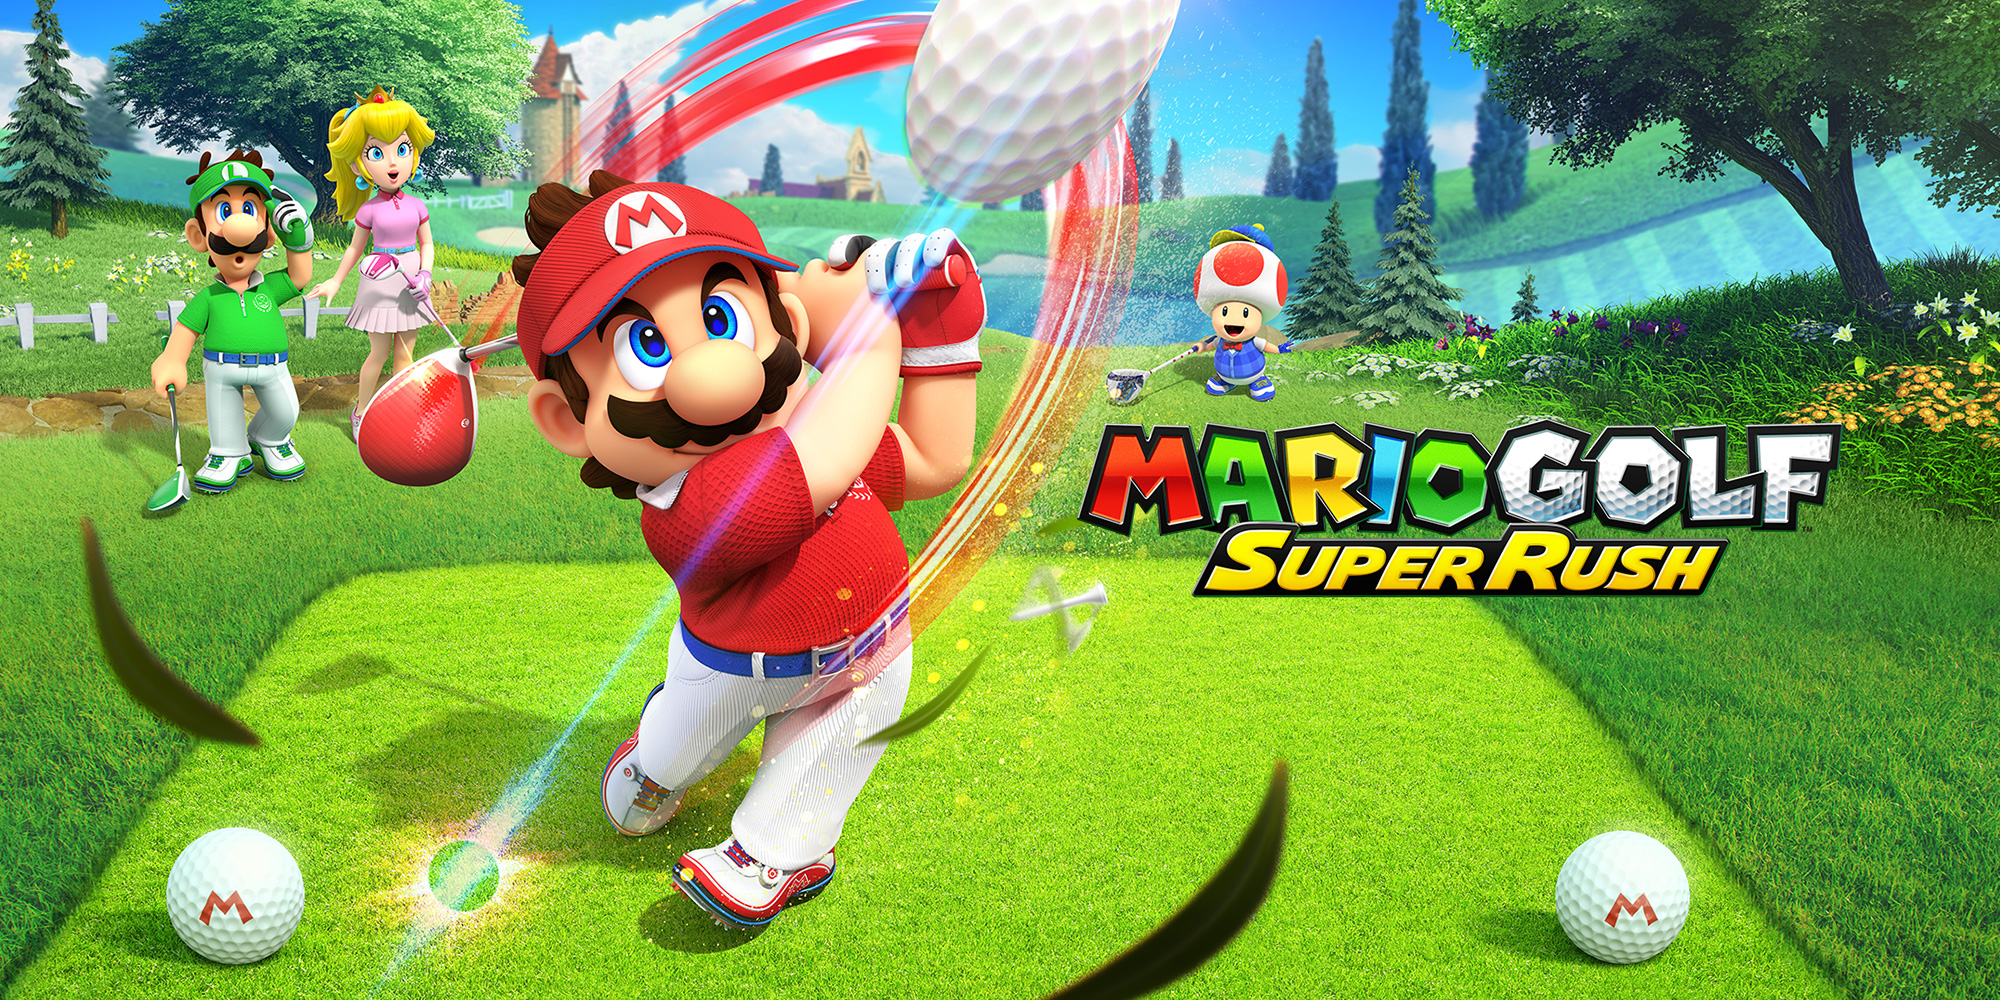 A New Mario Golf: Super Rush Trailer Is Here